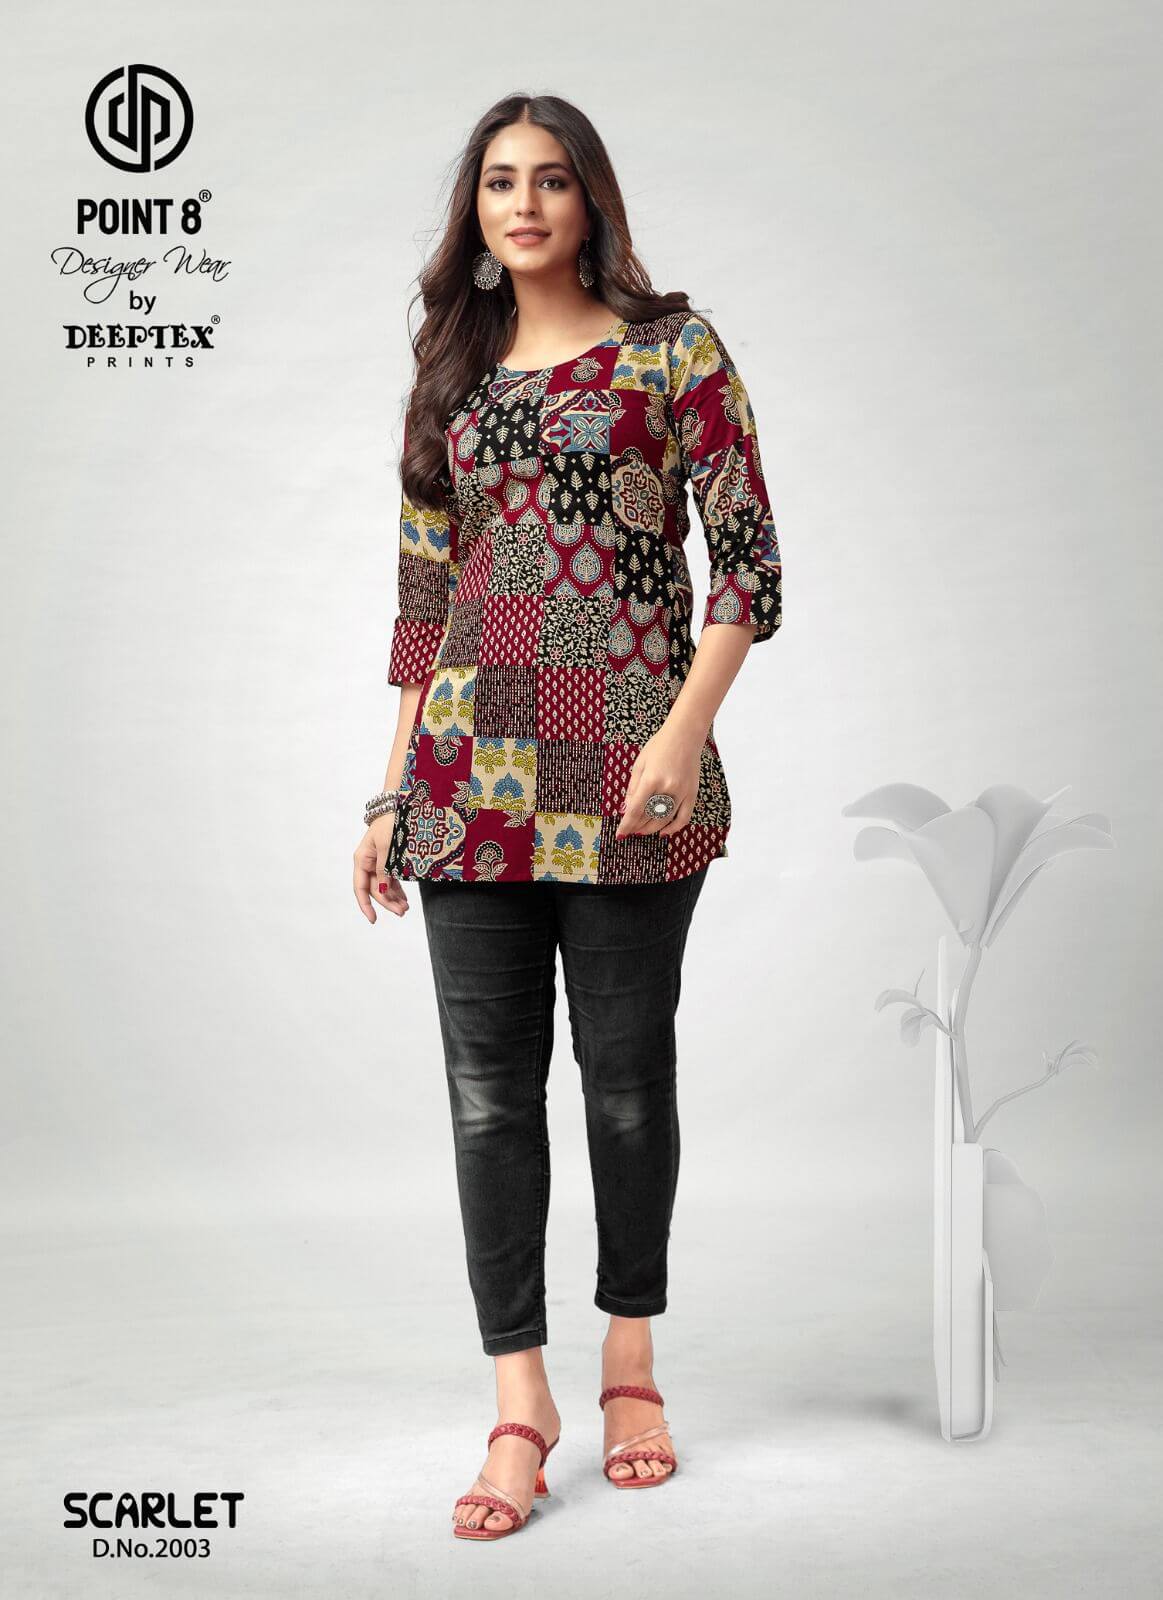 Deeptex Point 8 Scarlet vol 2 Ladies Tops Catalog collection 9